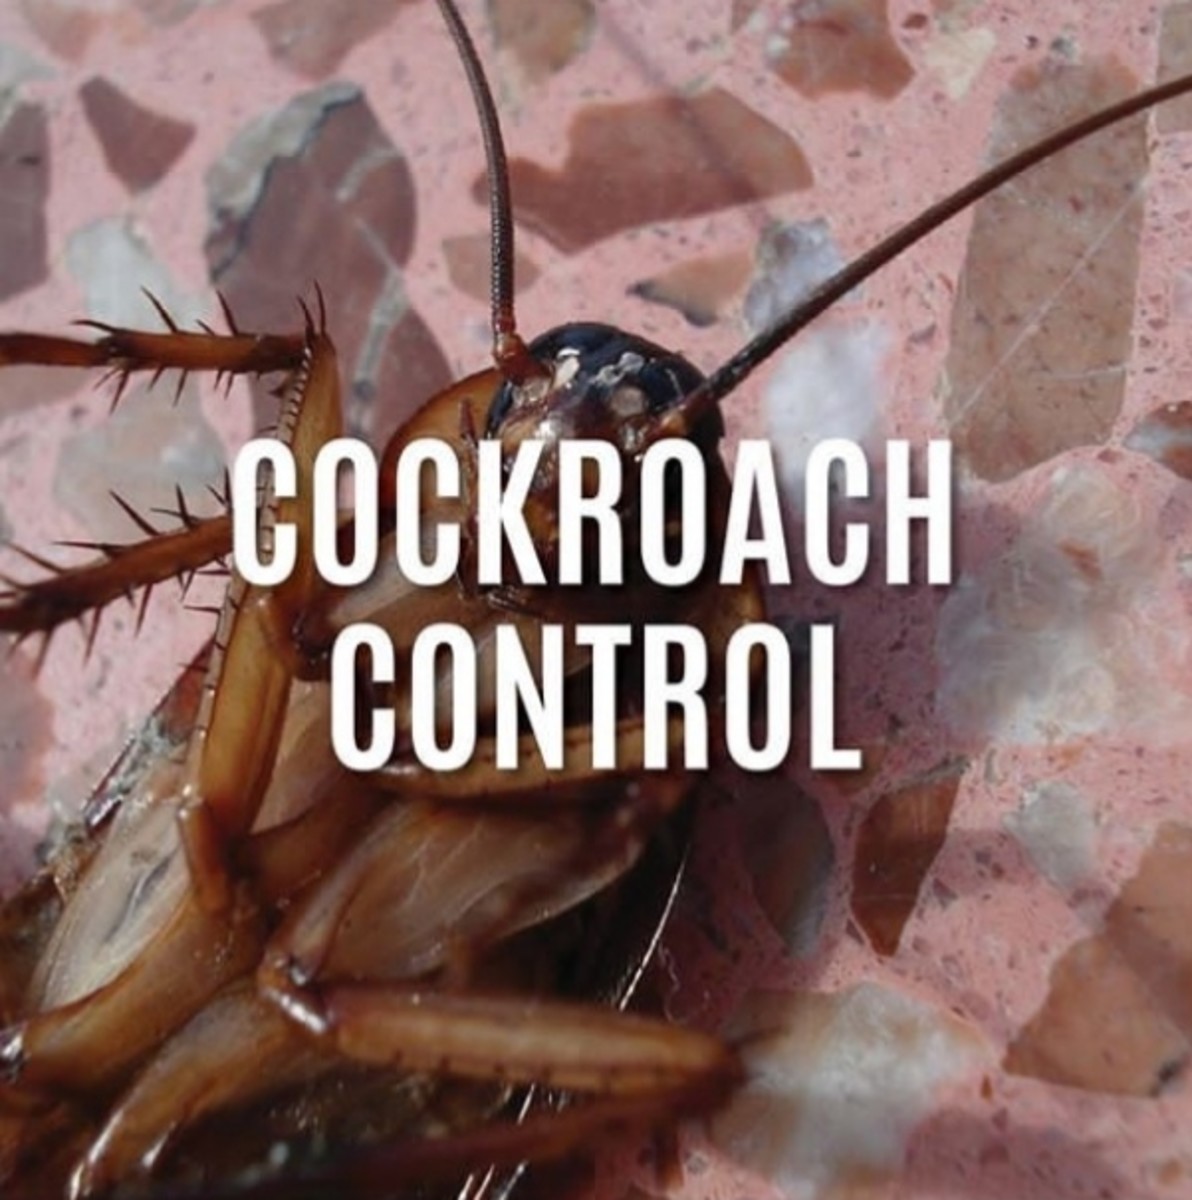 Learn about some methods to keep cockroaches away without using harmful pesticides.